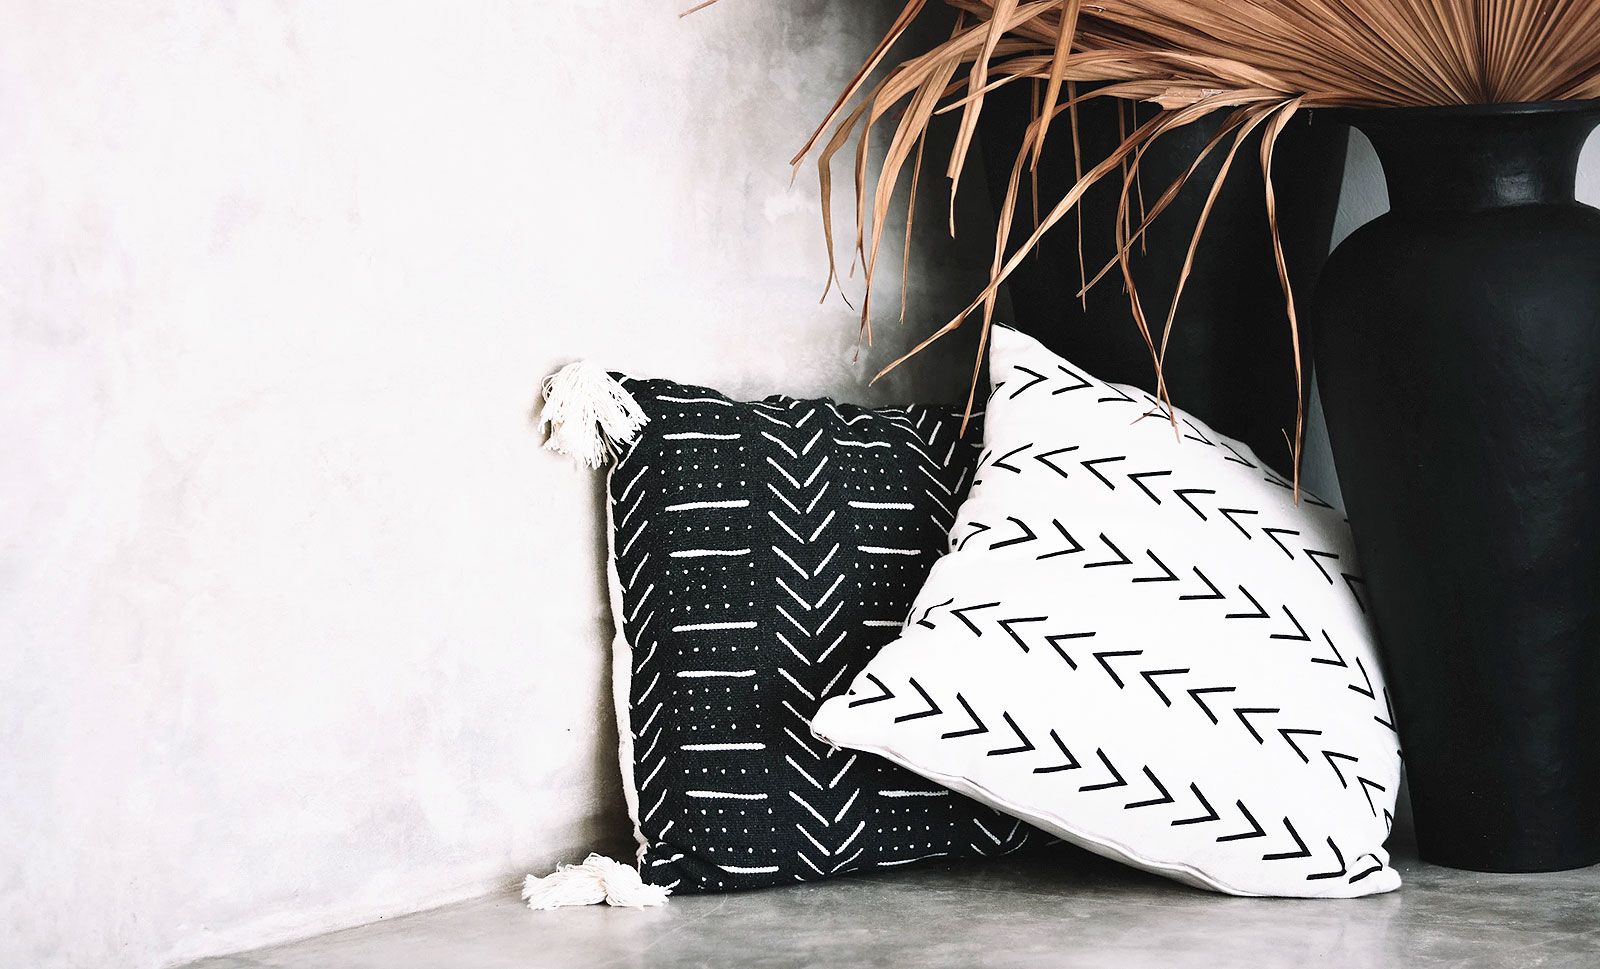 Patterned pillows next to a black vase